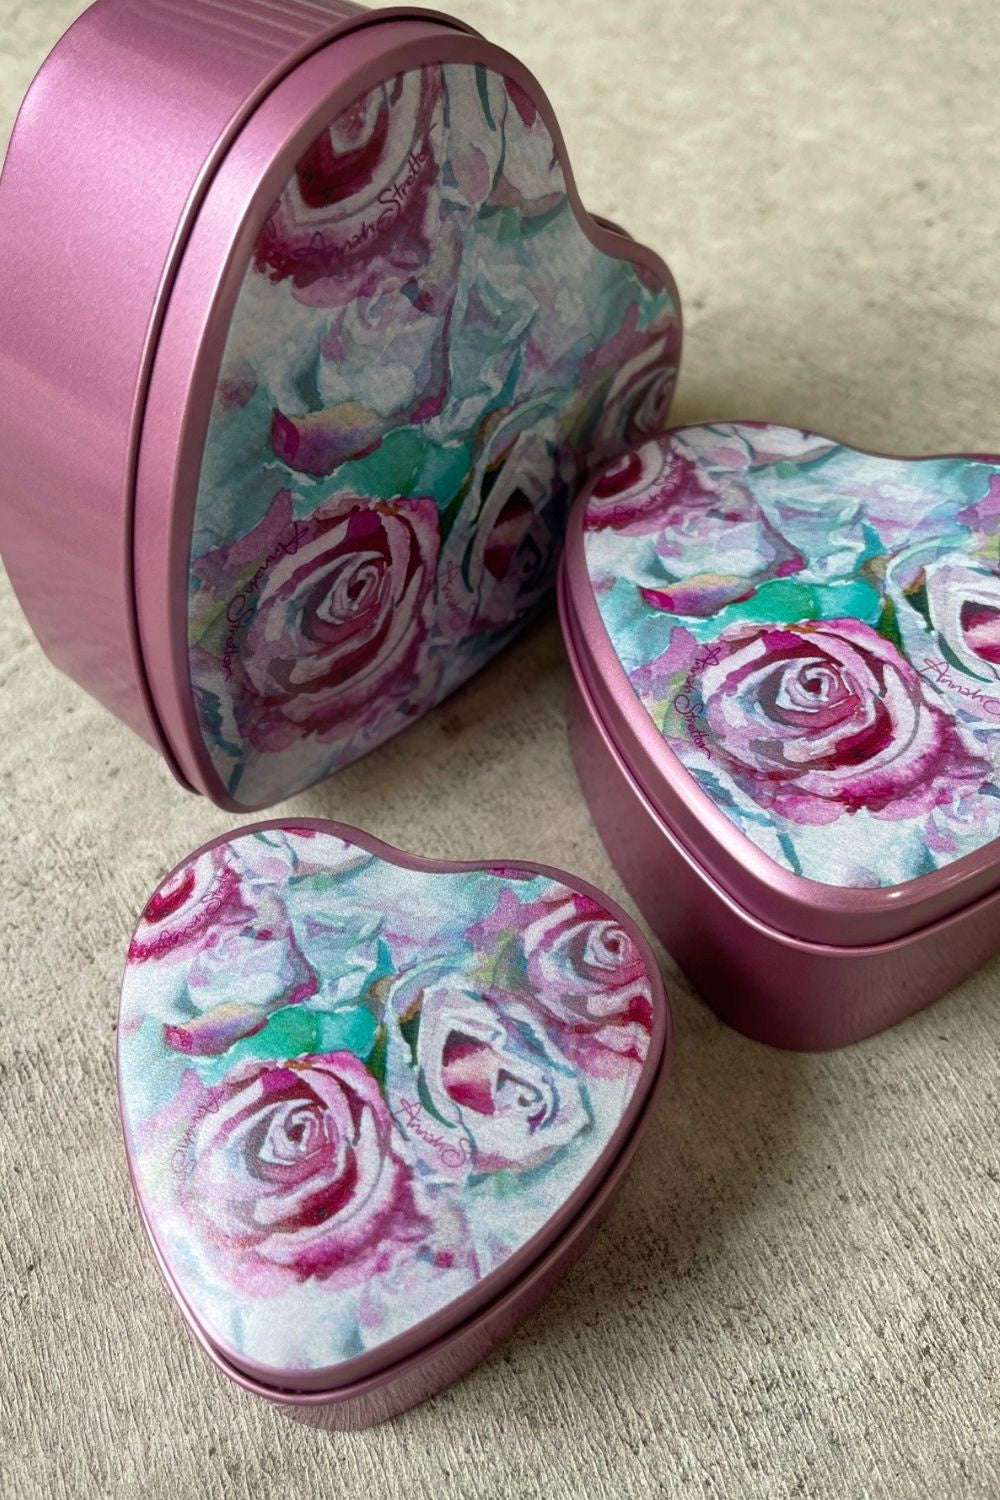 stacking heart shaped tins in pink, by annah stretton